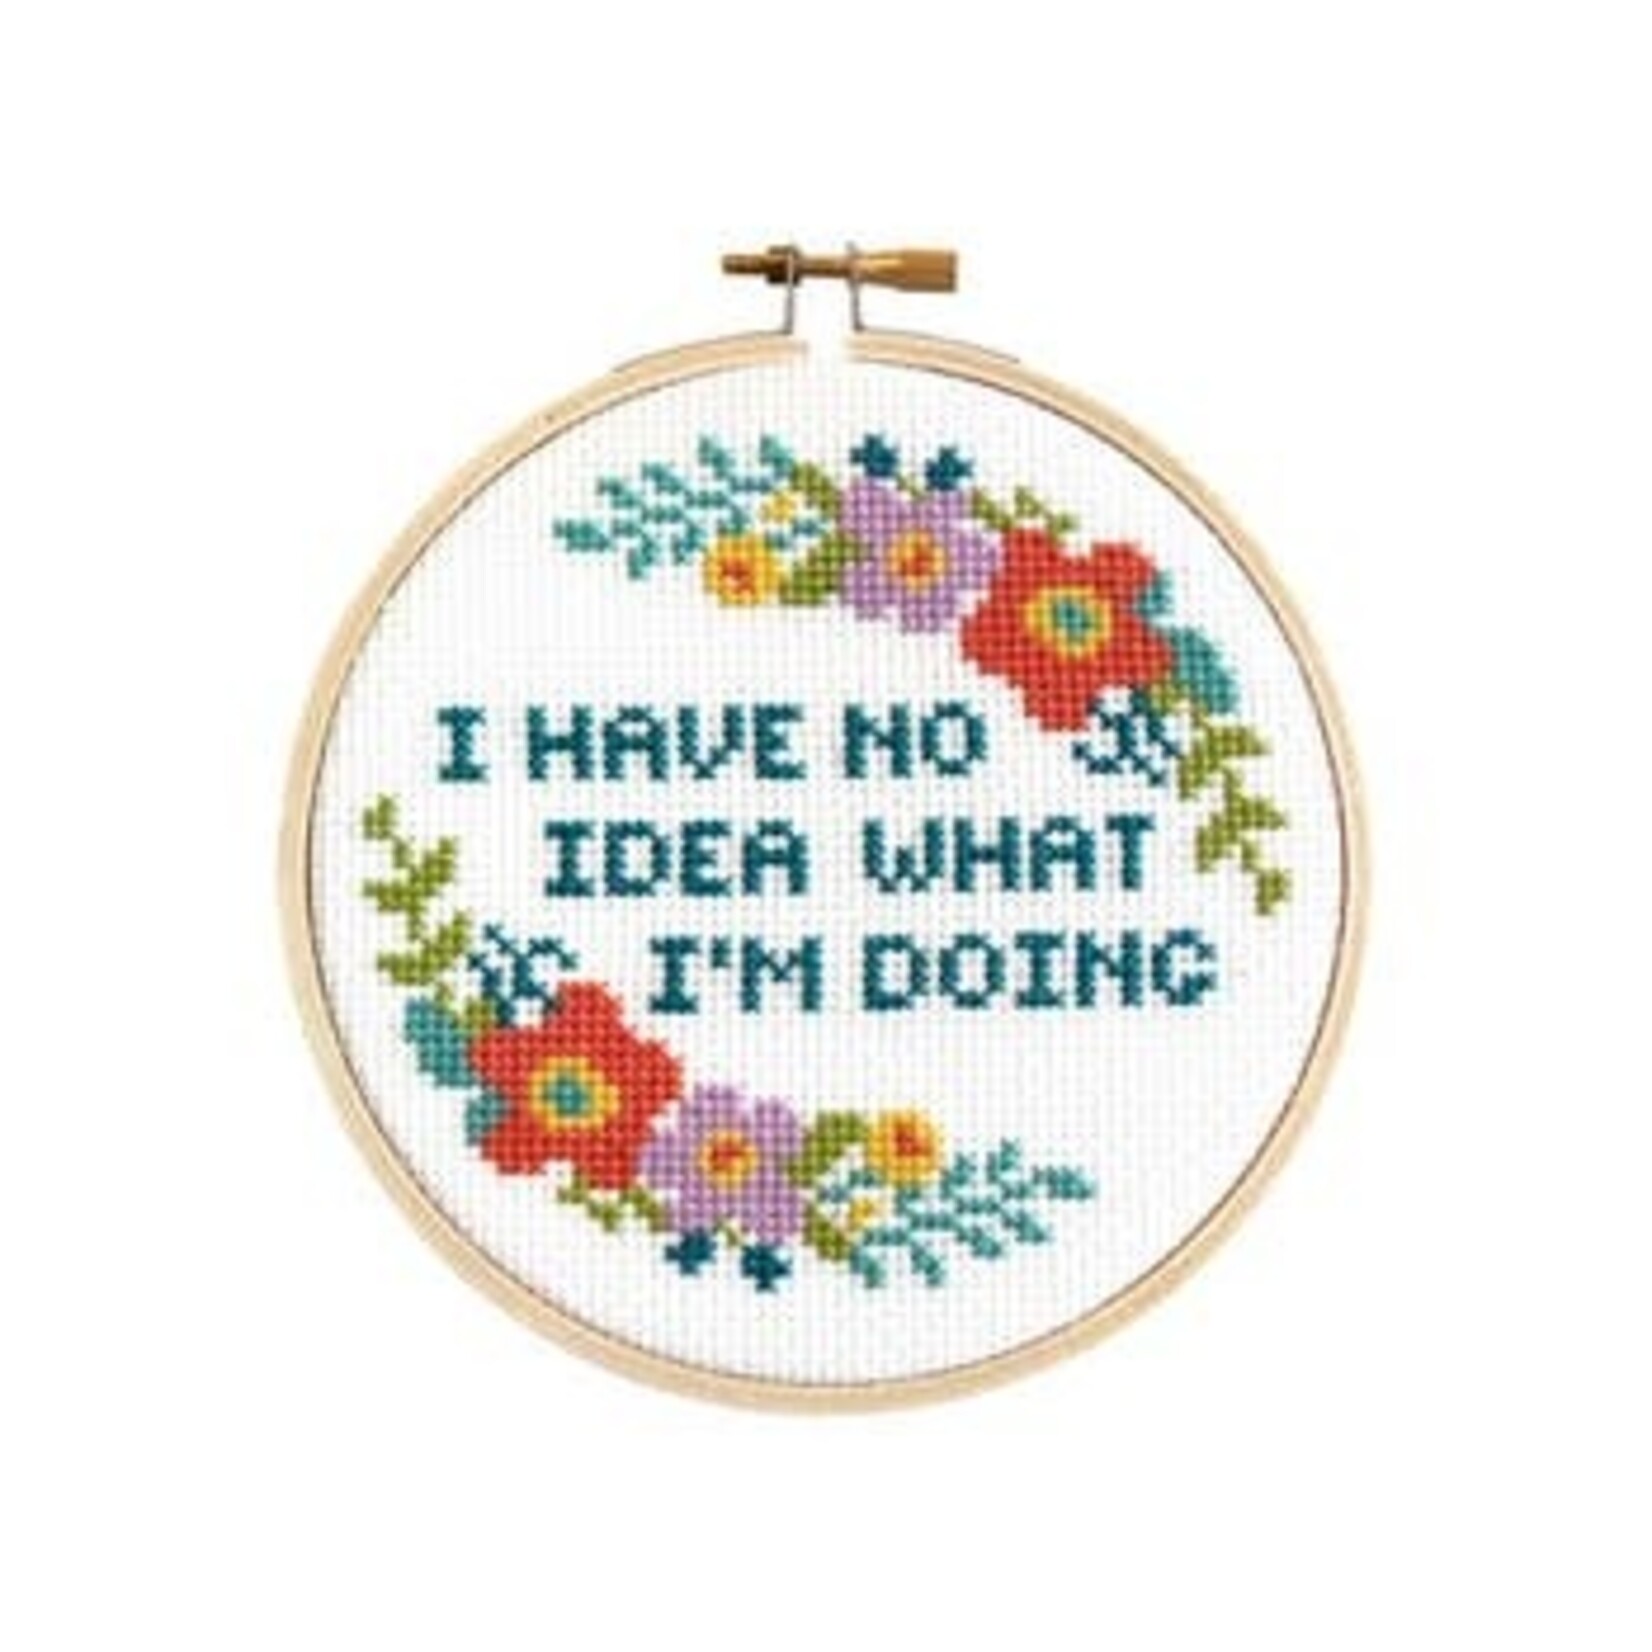 Stranded Cross Stitch Collection